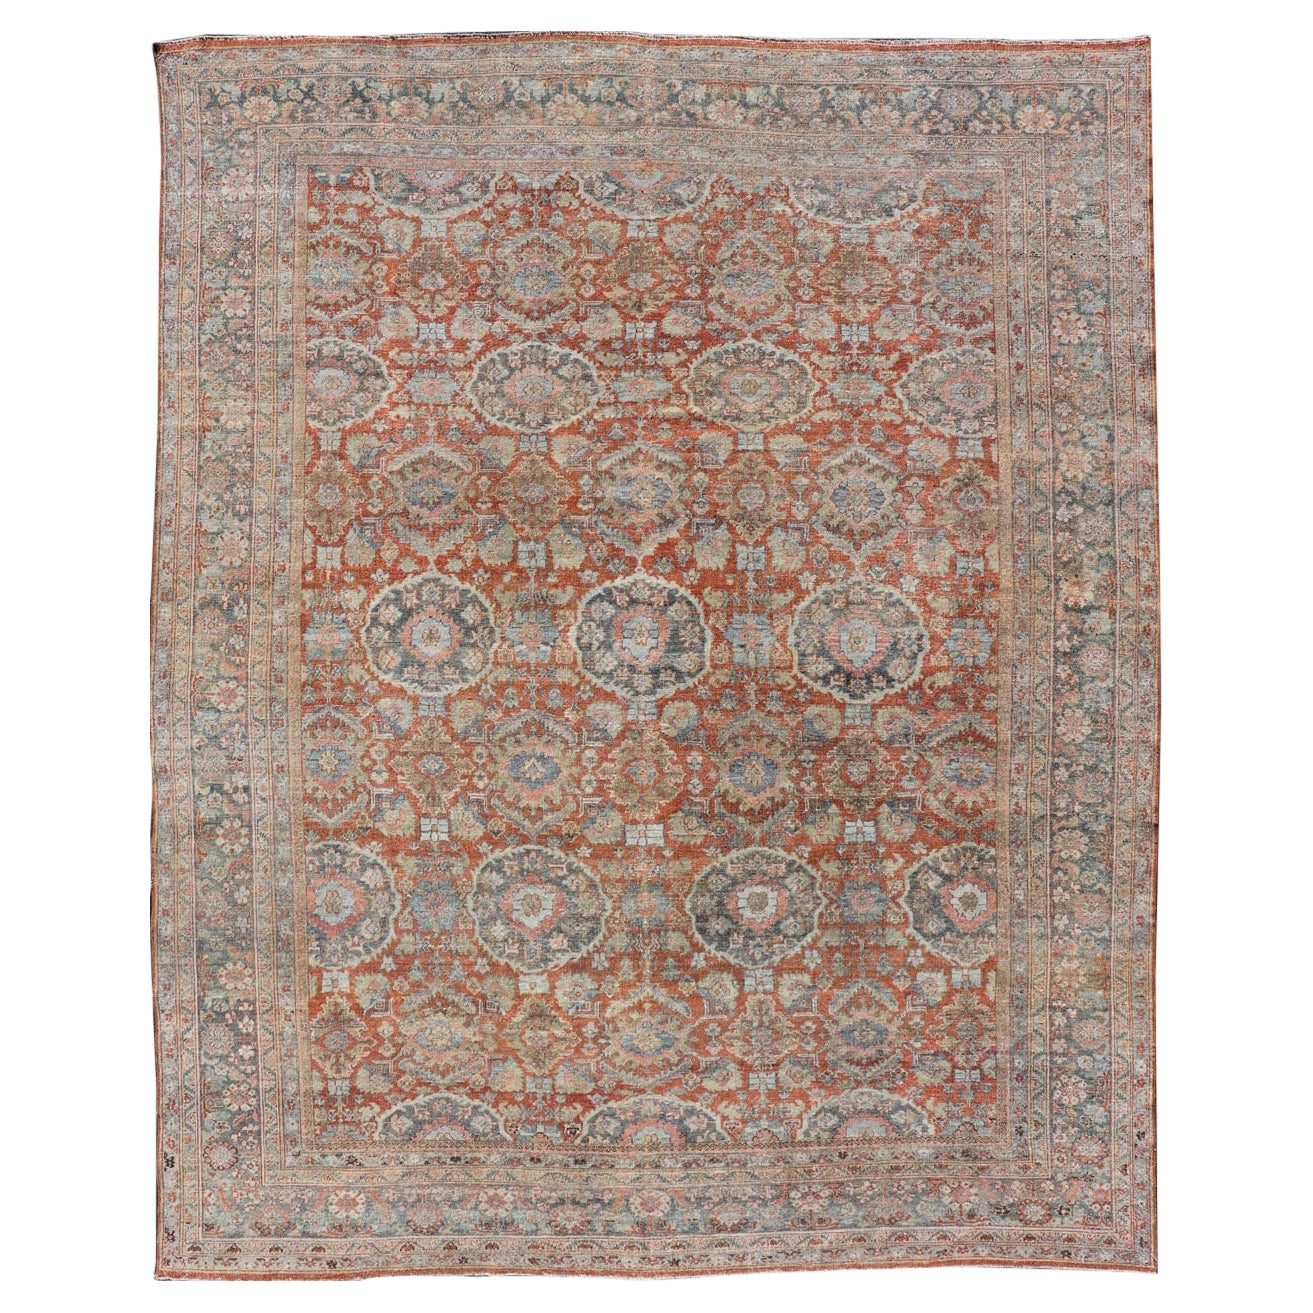 Antique Persian Colorful Sultanabad Mahal Rug with All Over Floral Design